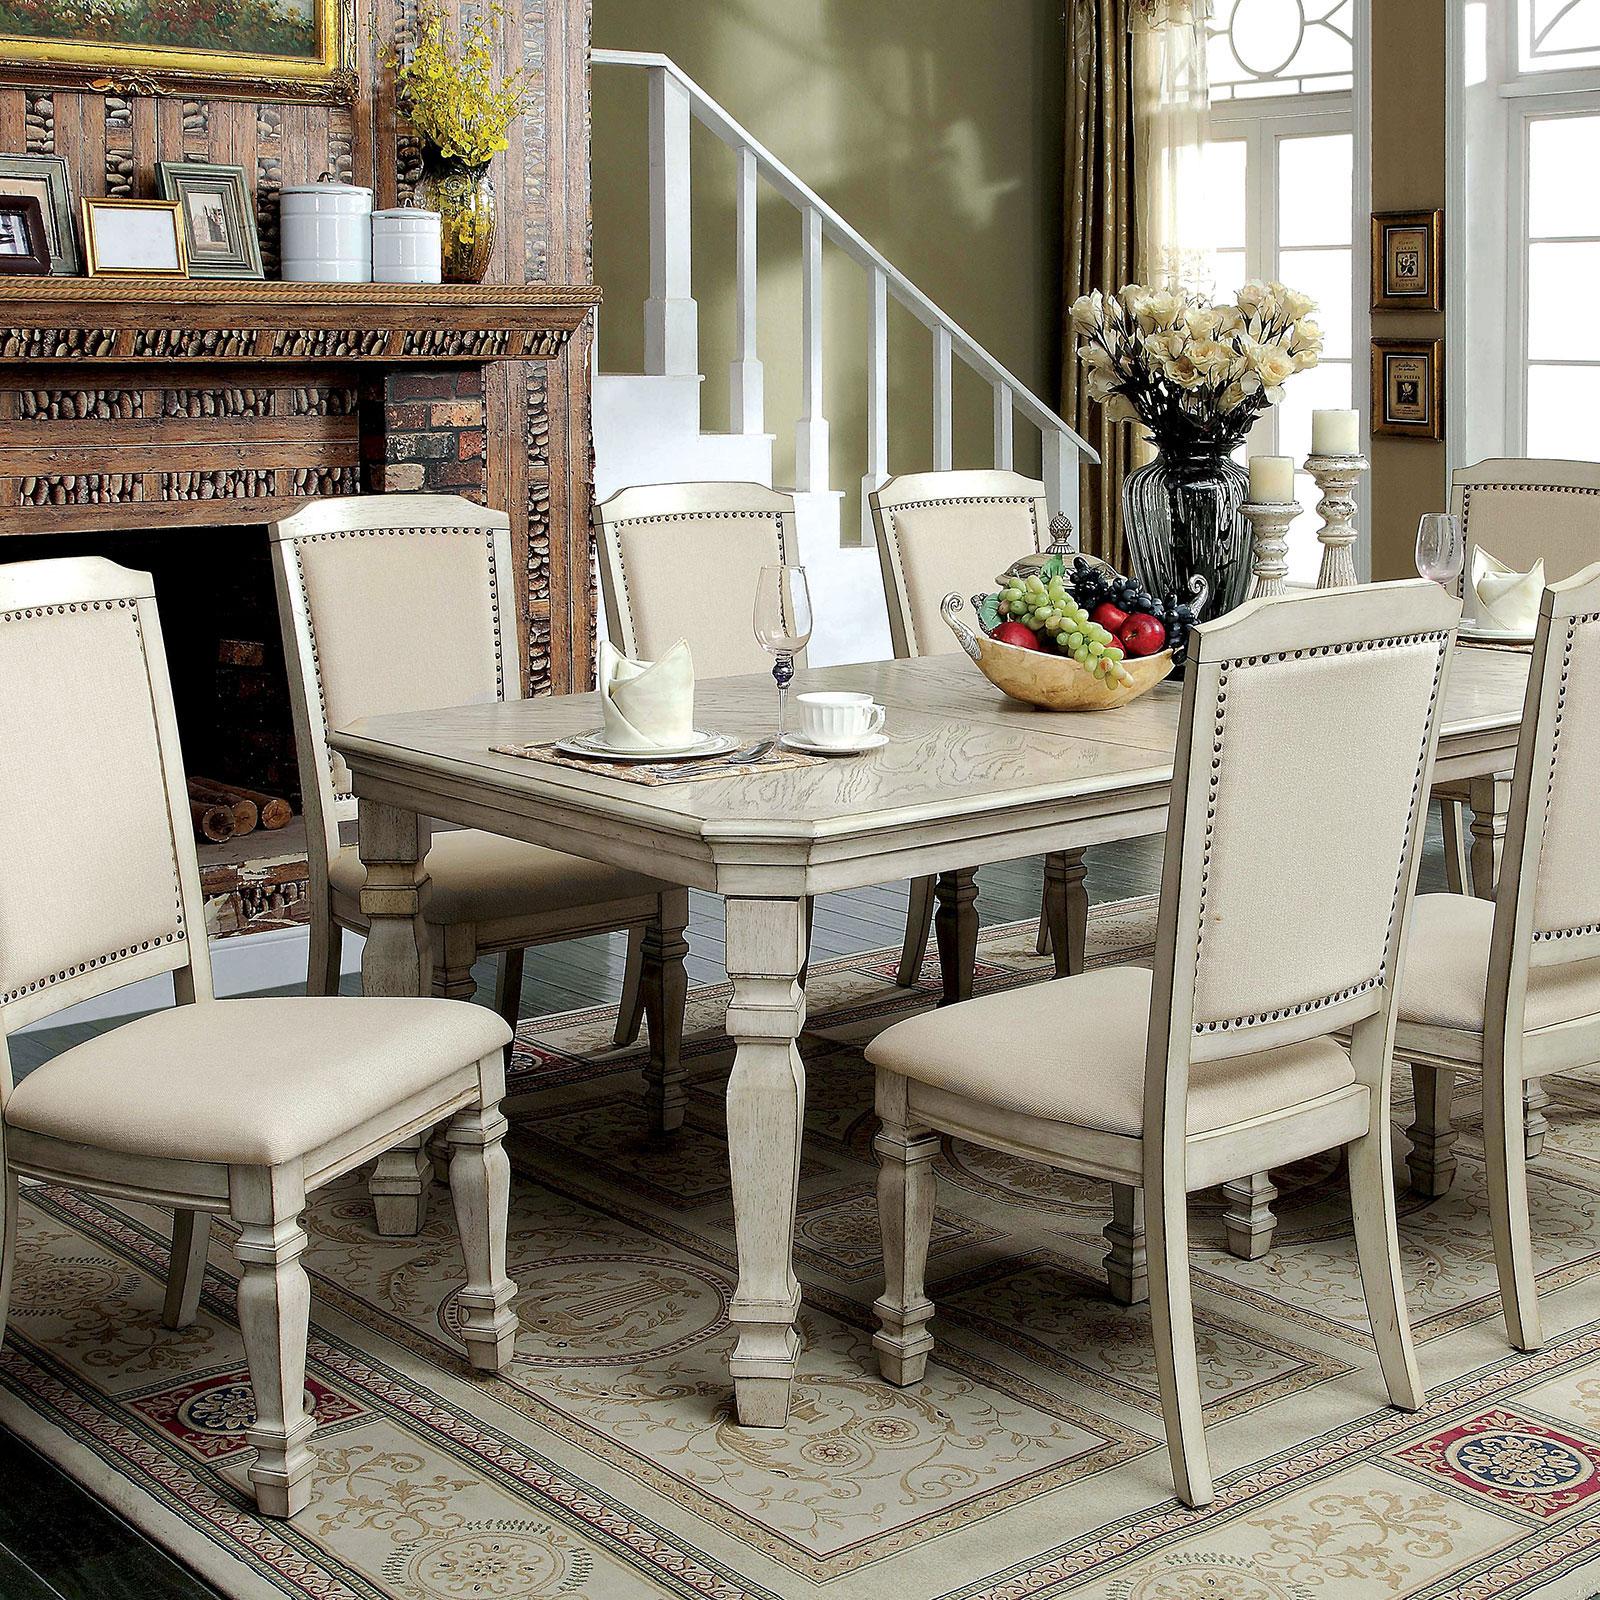 Transitional Dining Table HOLCROFT CM3600T CM3600T in Antique White, Ivory 